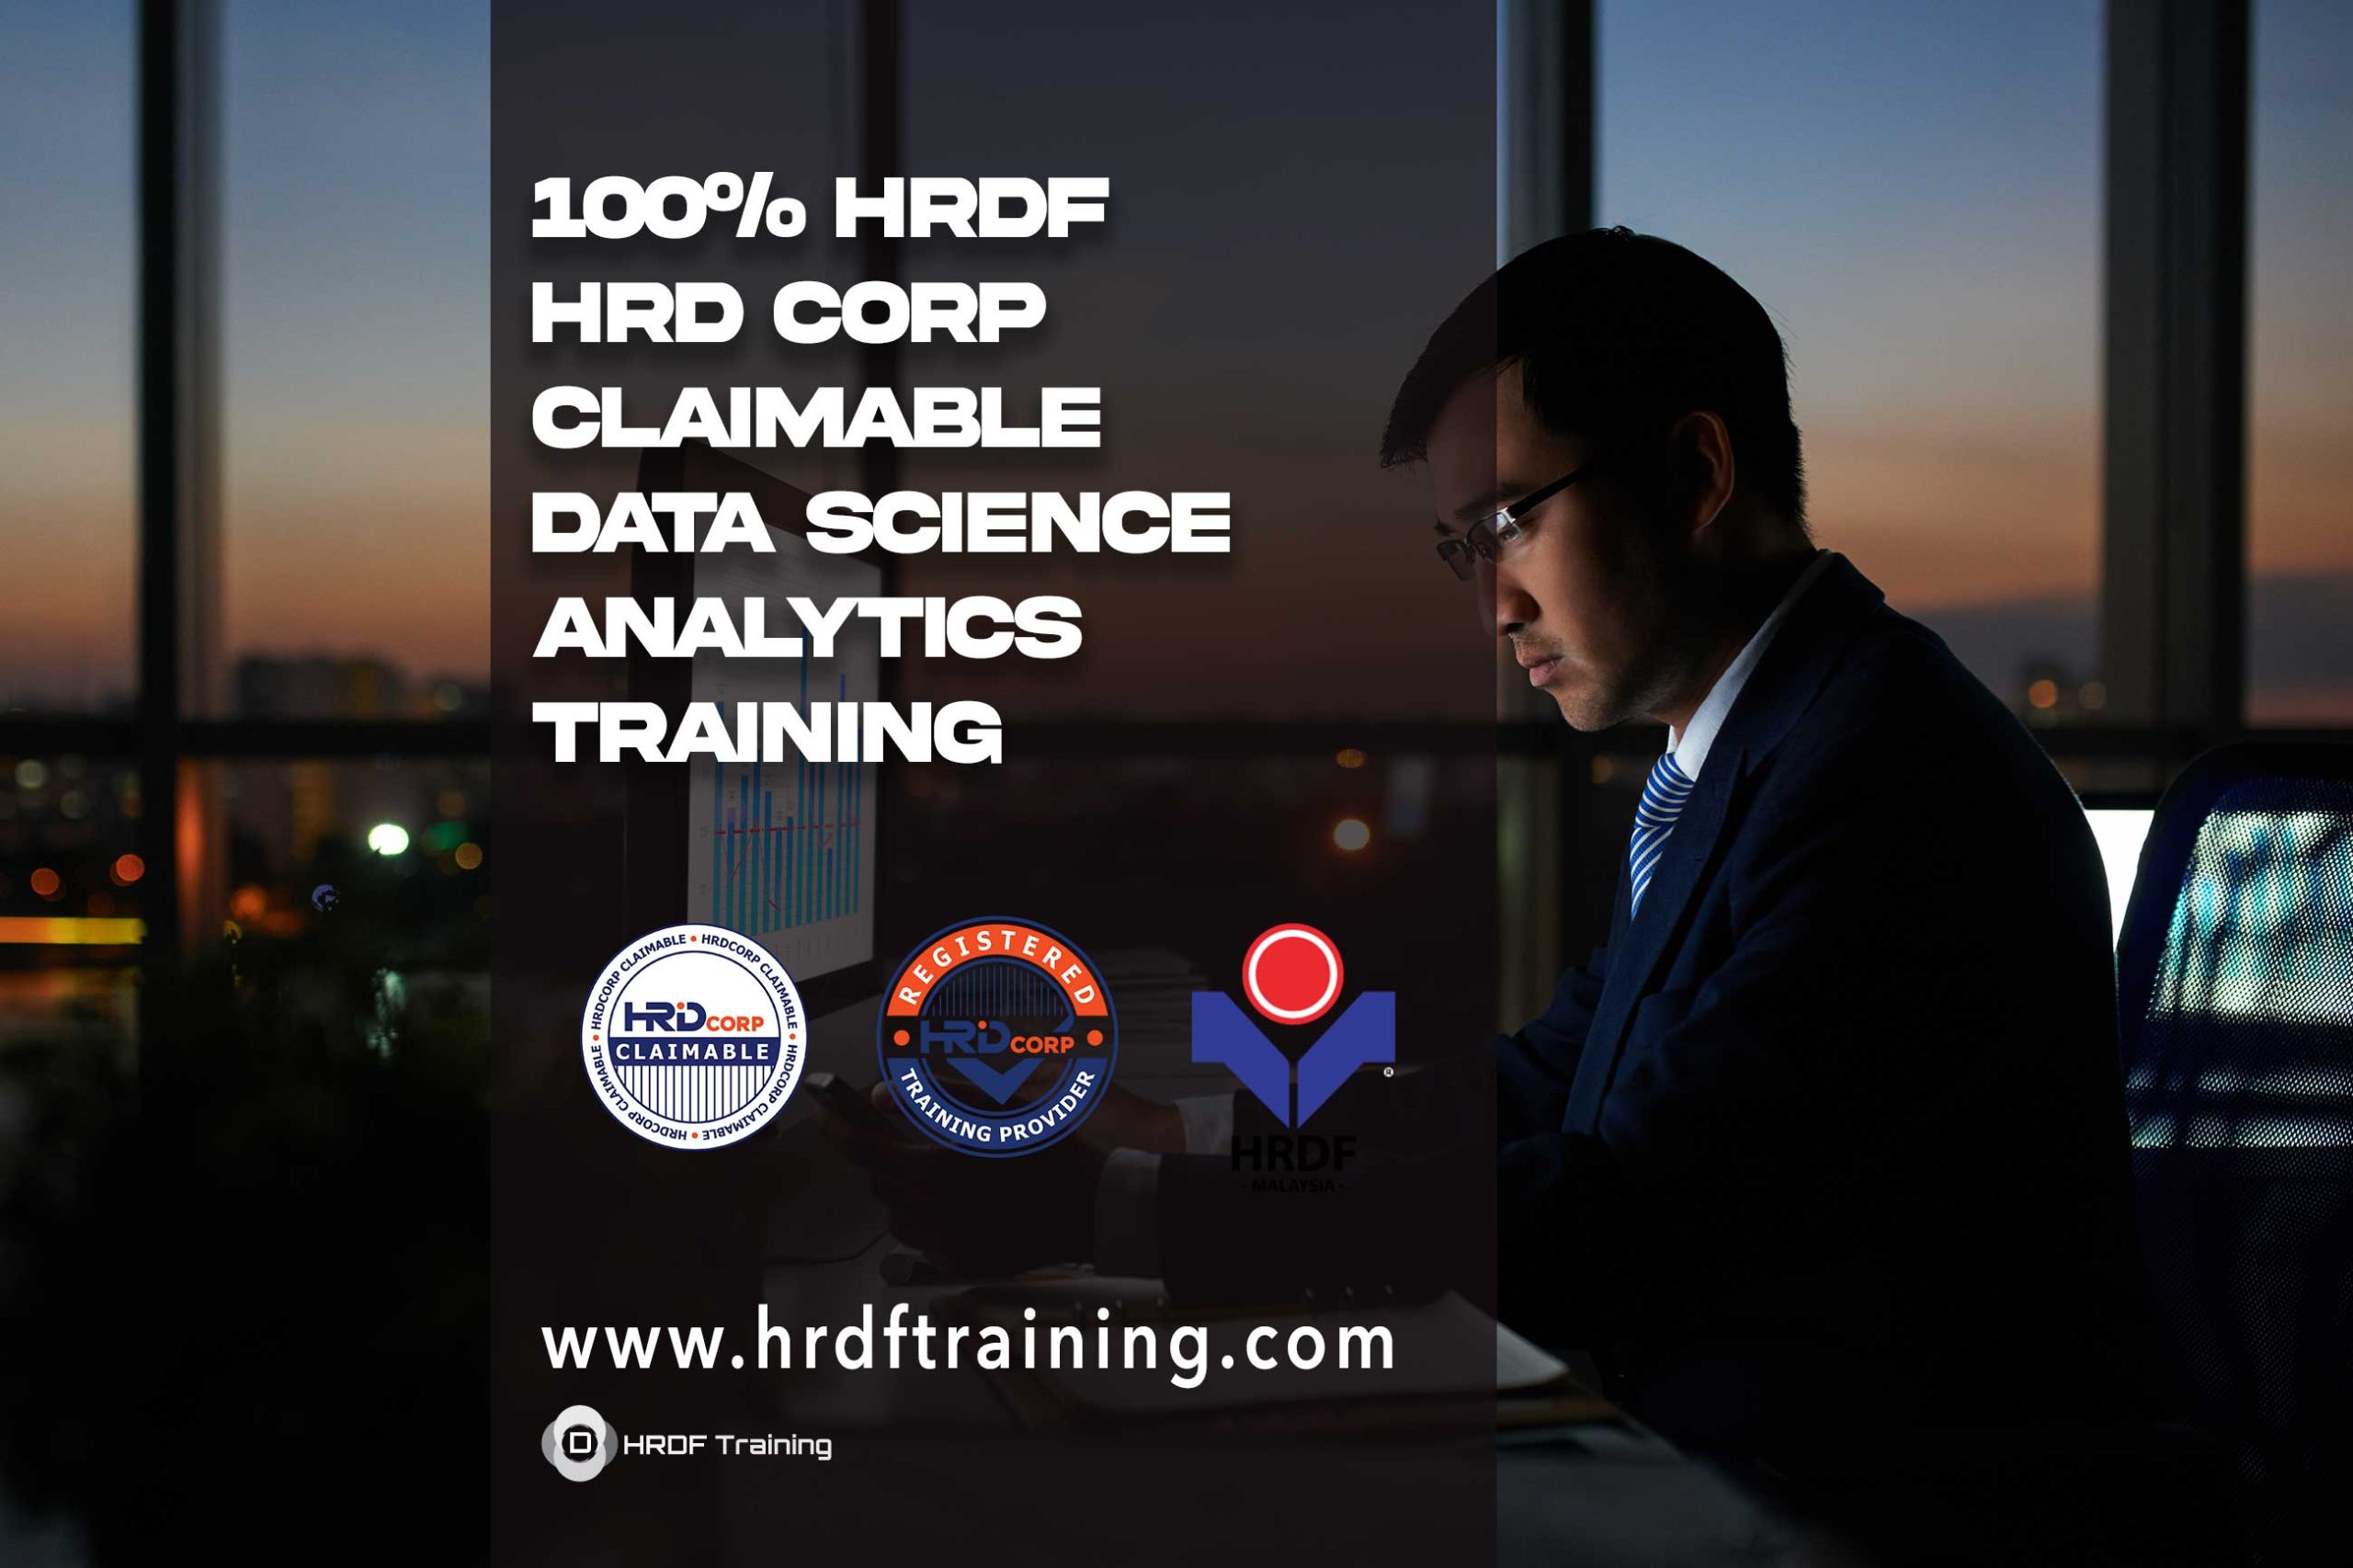 HRDF-HRD-Corp-Claimable-Data-Science-Analytics-Training